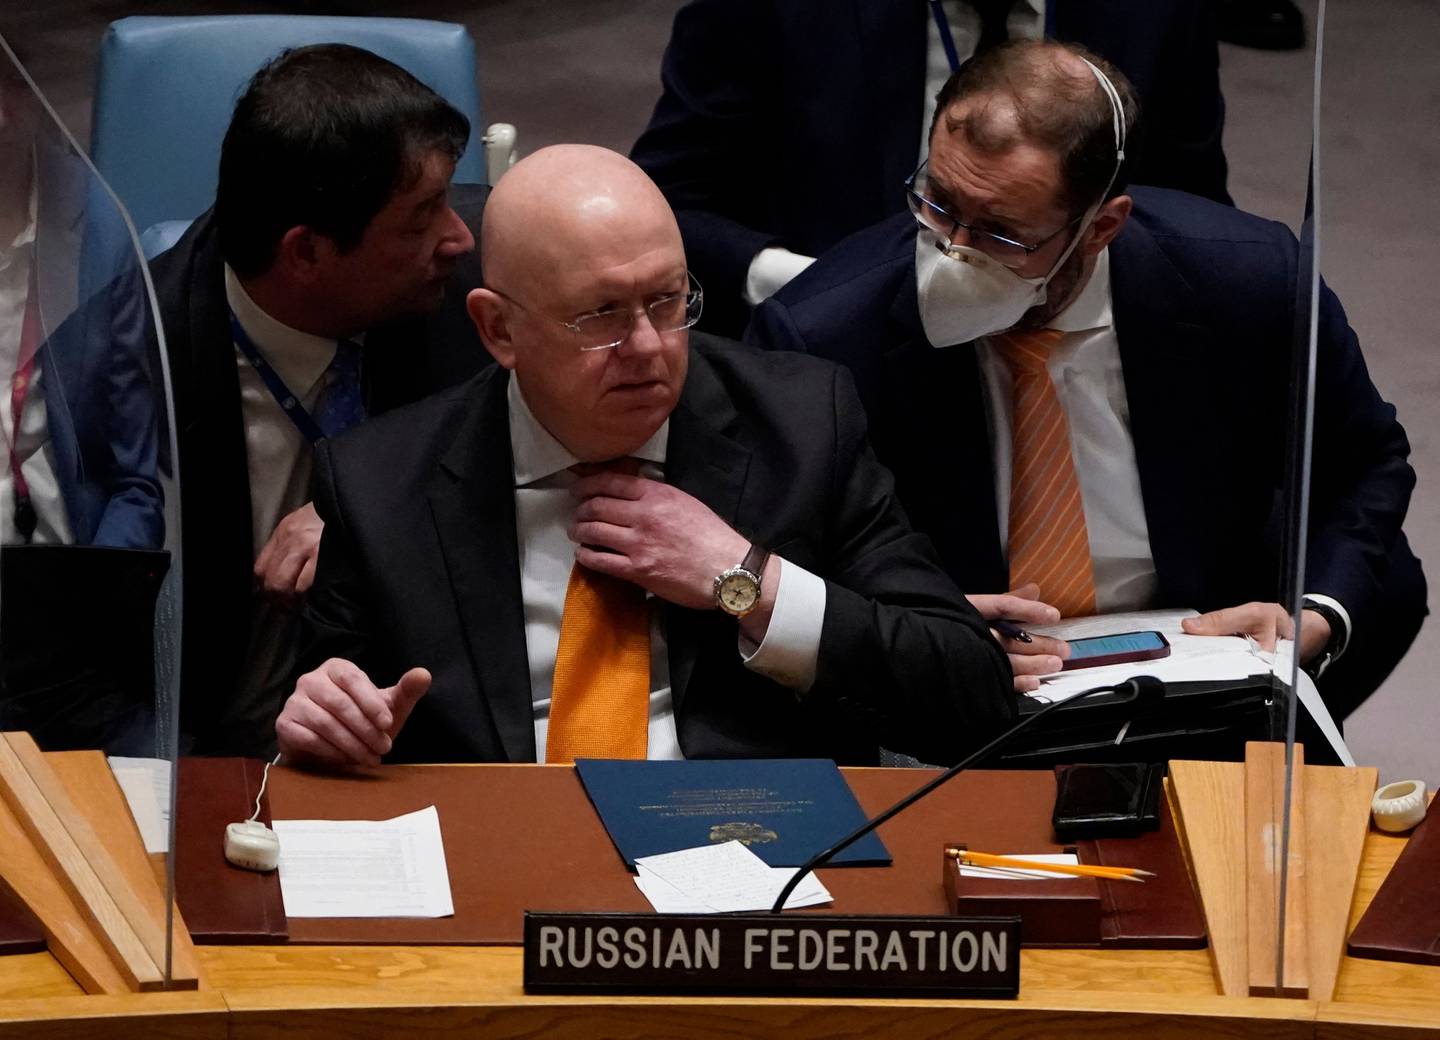 Ambassador Vassily Nebenzia, permanent representative of the Russian Federation to the UN, attends a Security Council ministerial debate in New York last week. AFP